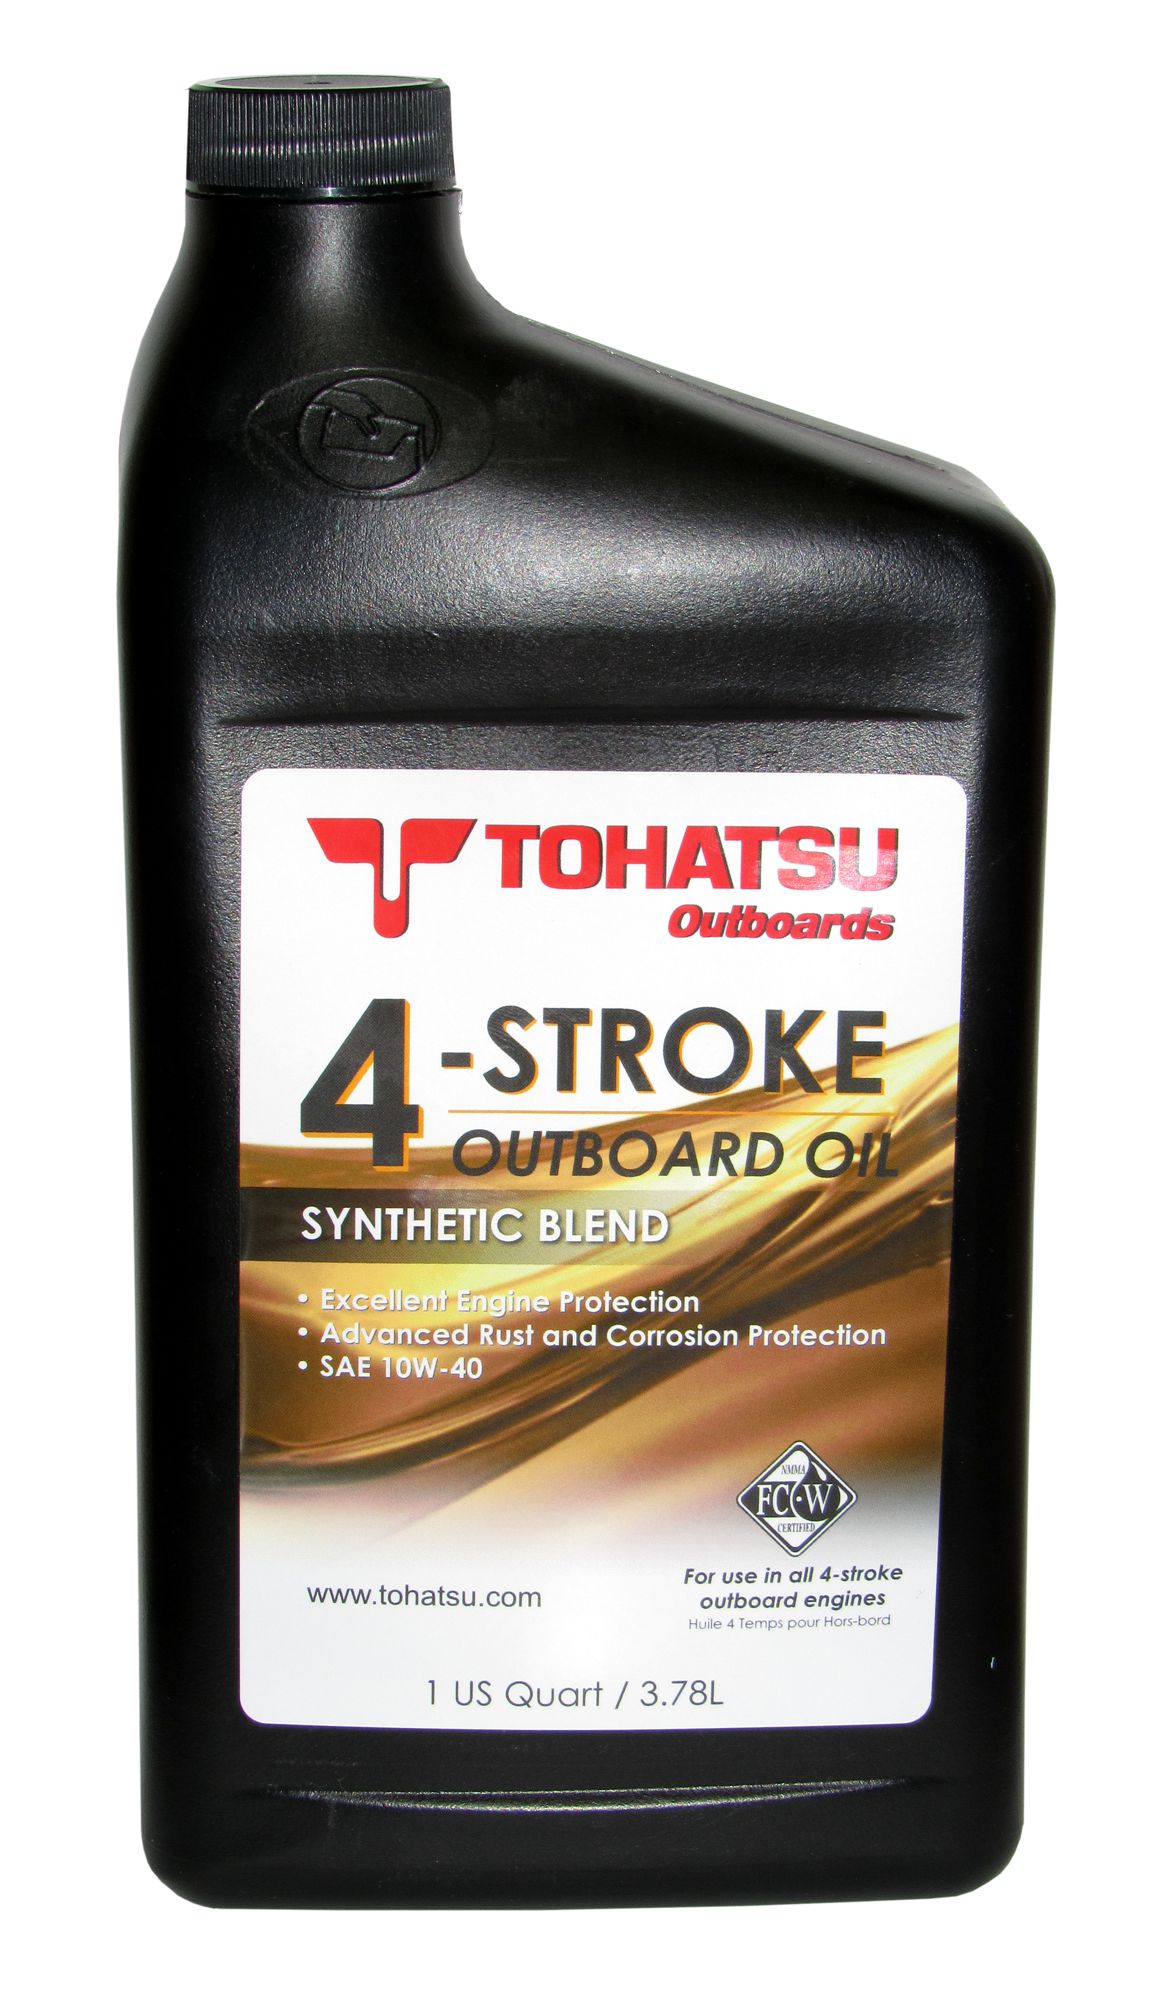 TOHATSU 4-STROKE OUTBOARD OIL SYNTHETIC BLEND 10w-40 0,946L